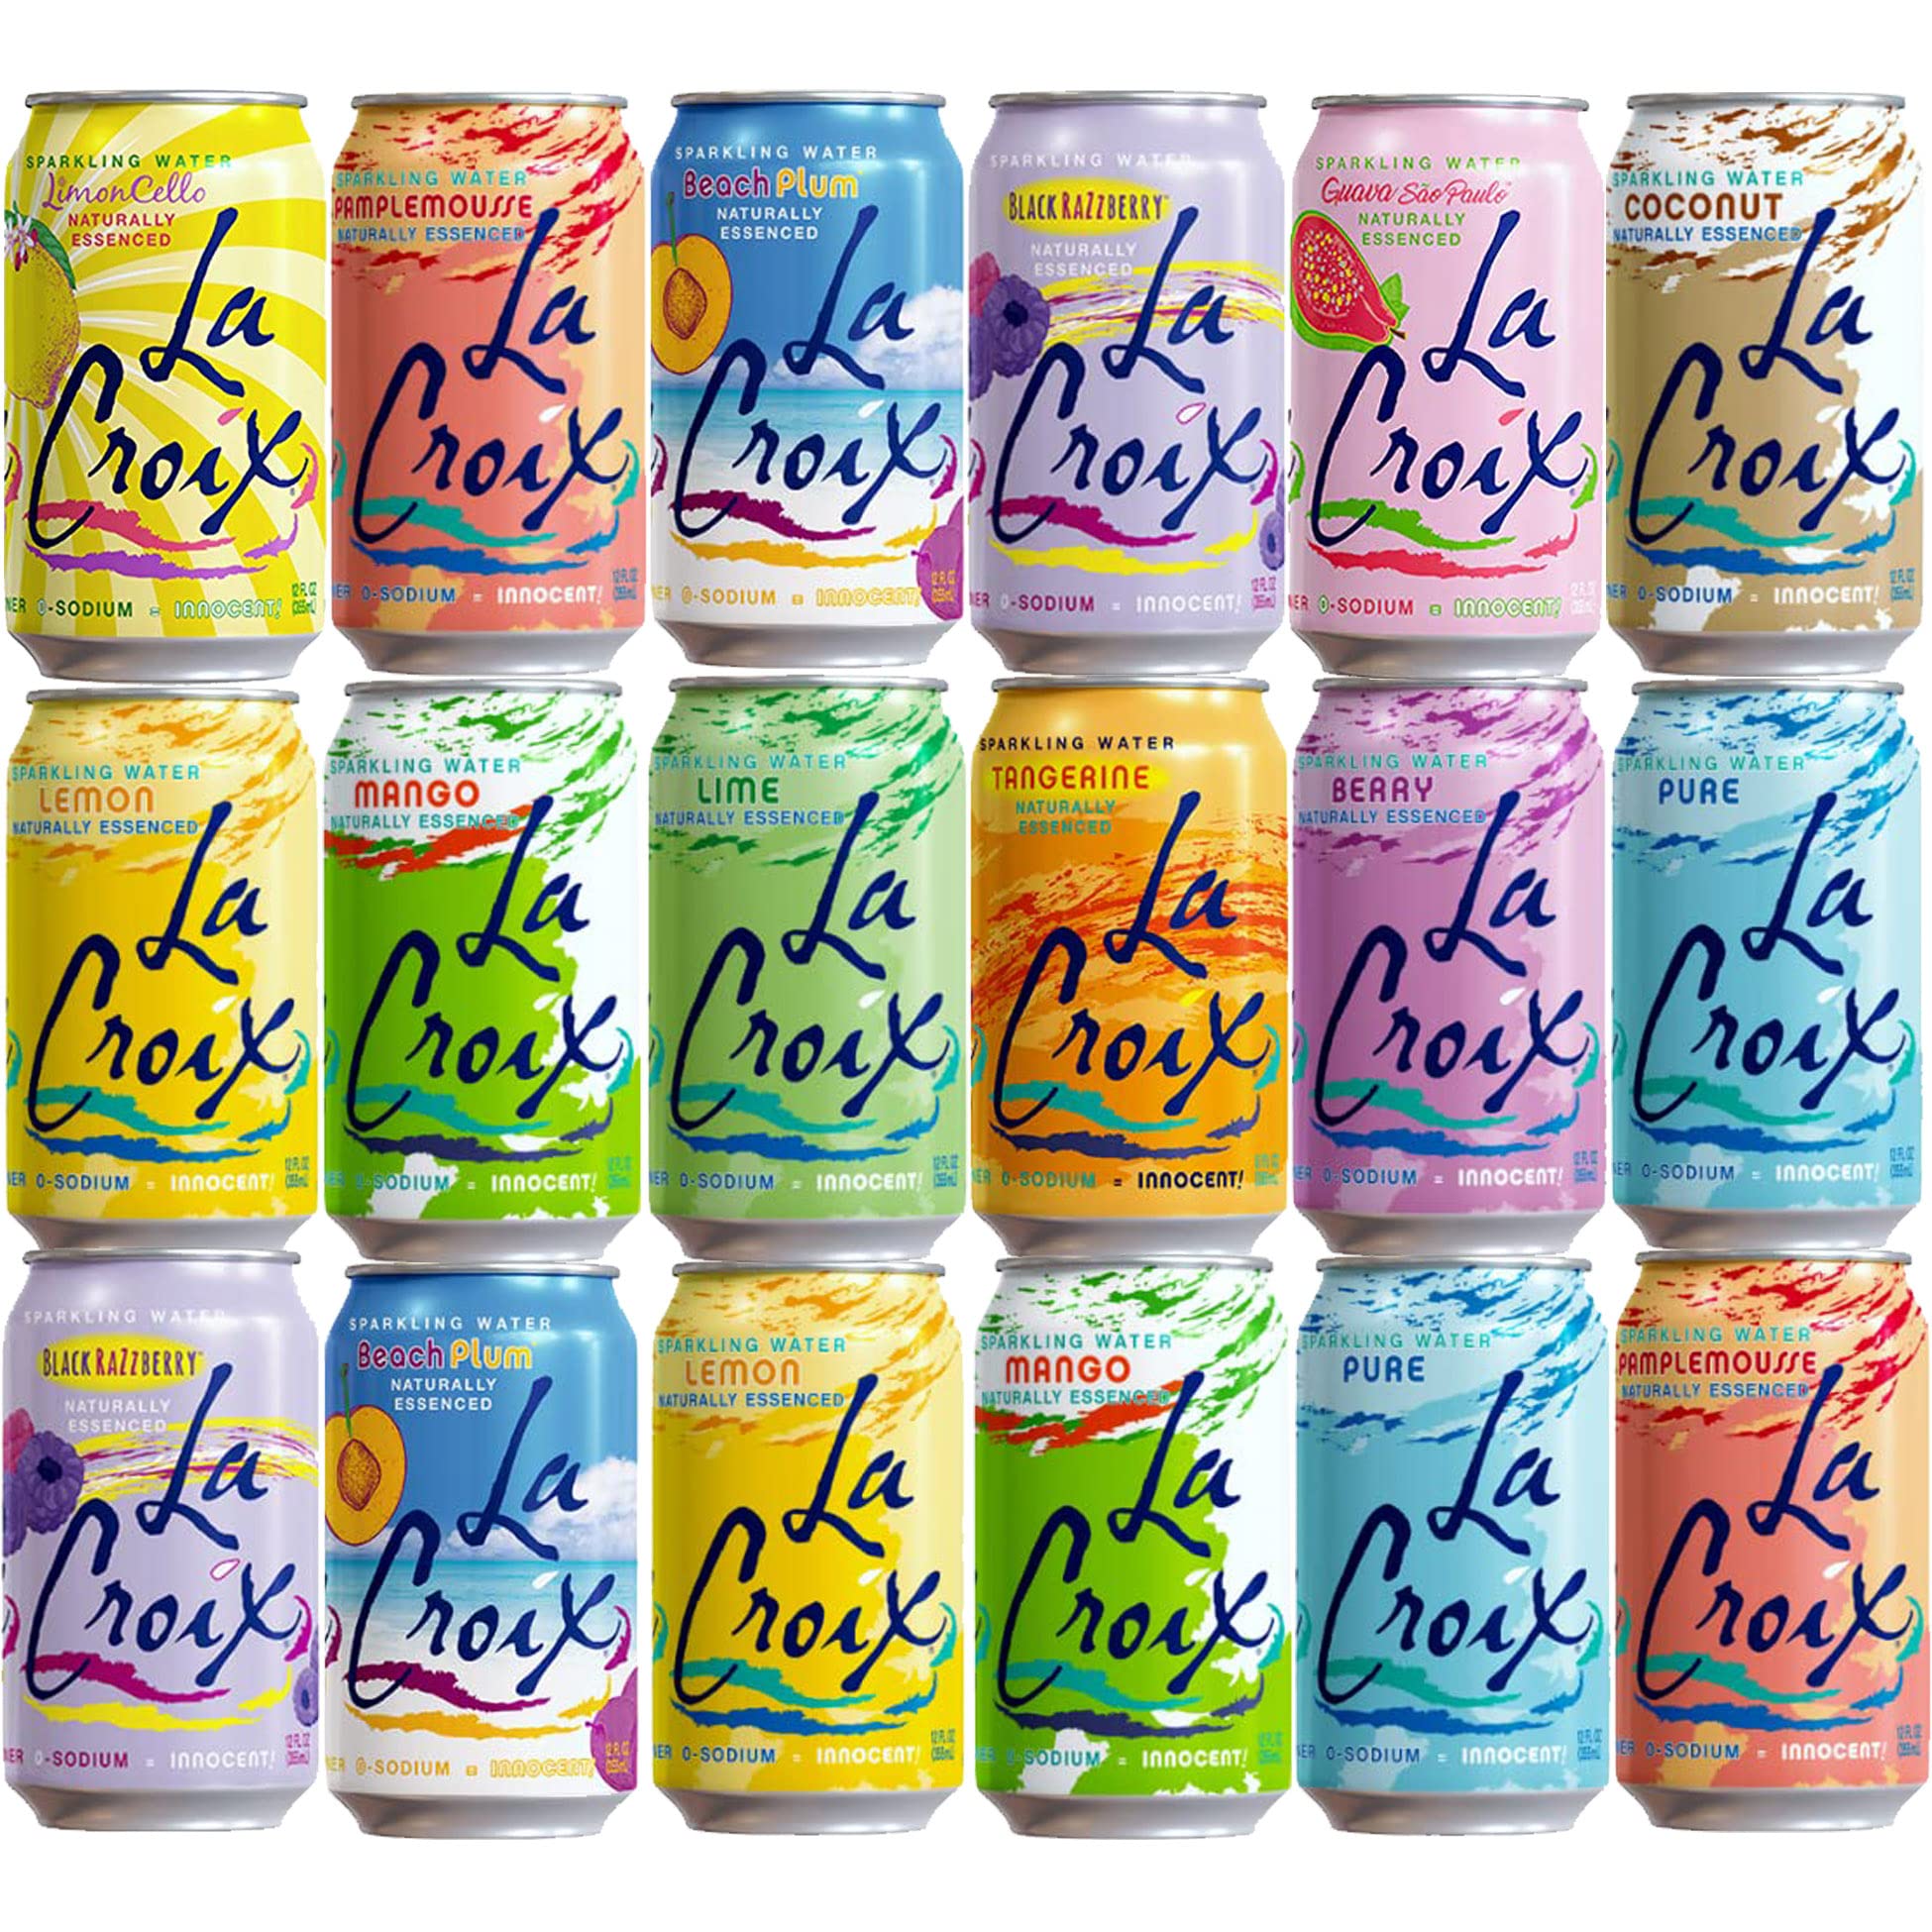 BeeQ Box - (Pack of 18) La Croix Sparkling Water, Variety of 12 Flavors, Naturally Essenced Sparkling Water, 12 Ounce Cans Variety Packs 12.02 Fl Oz (Pack of 18)